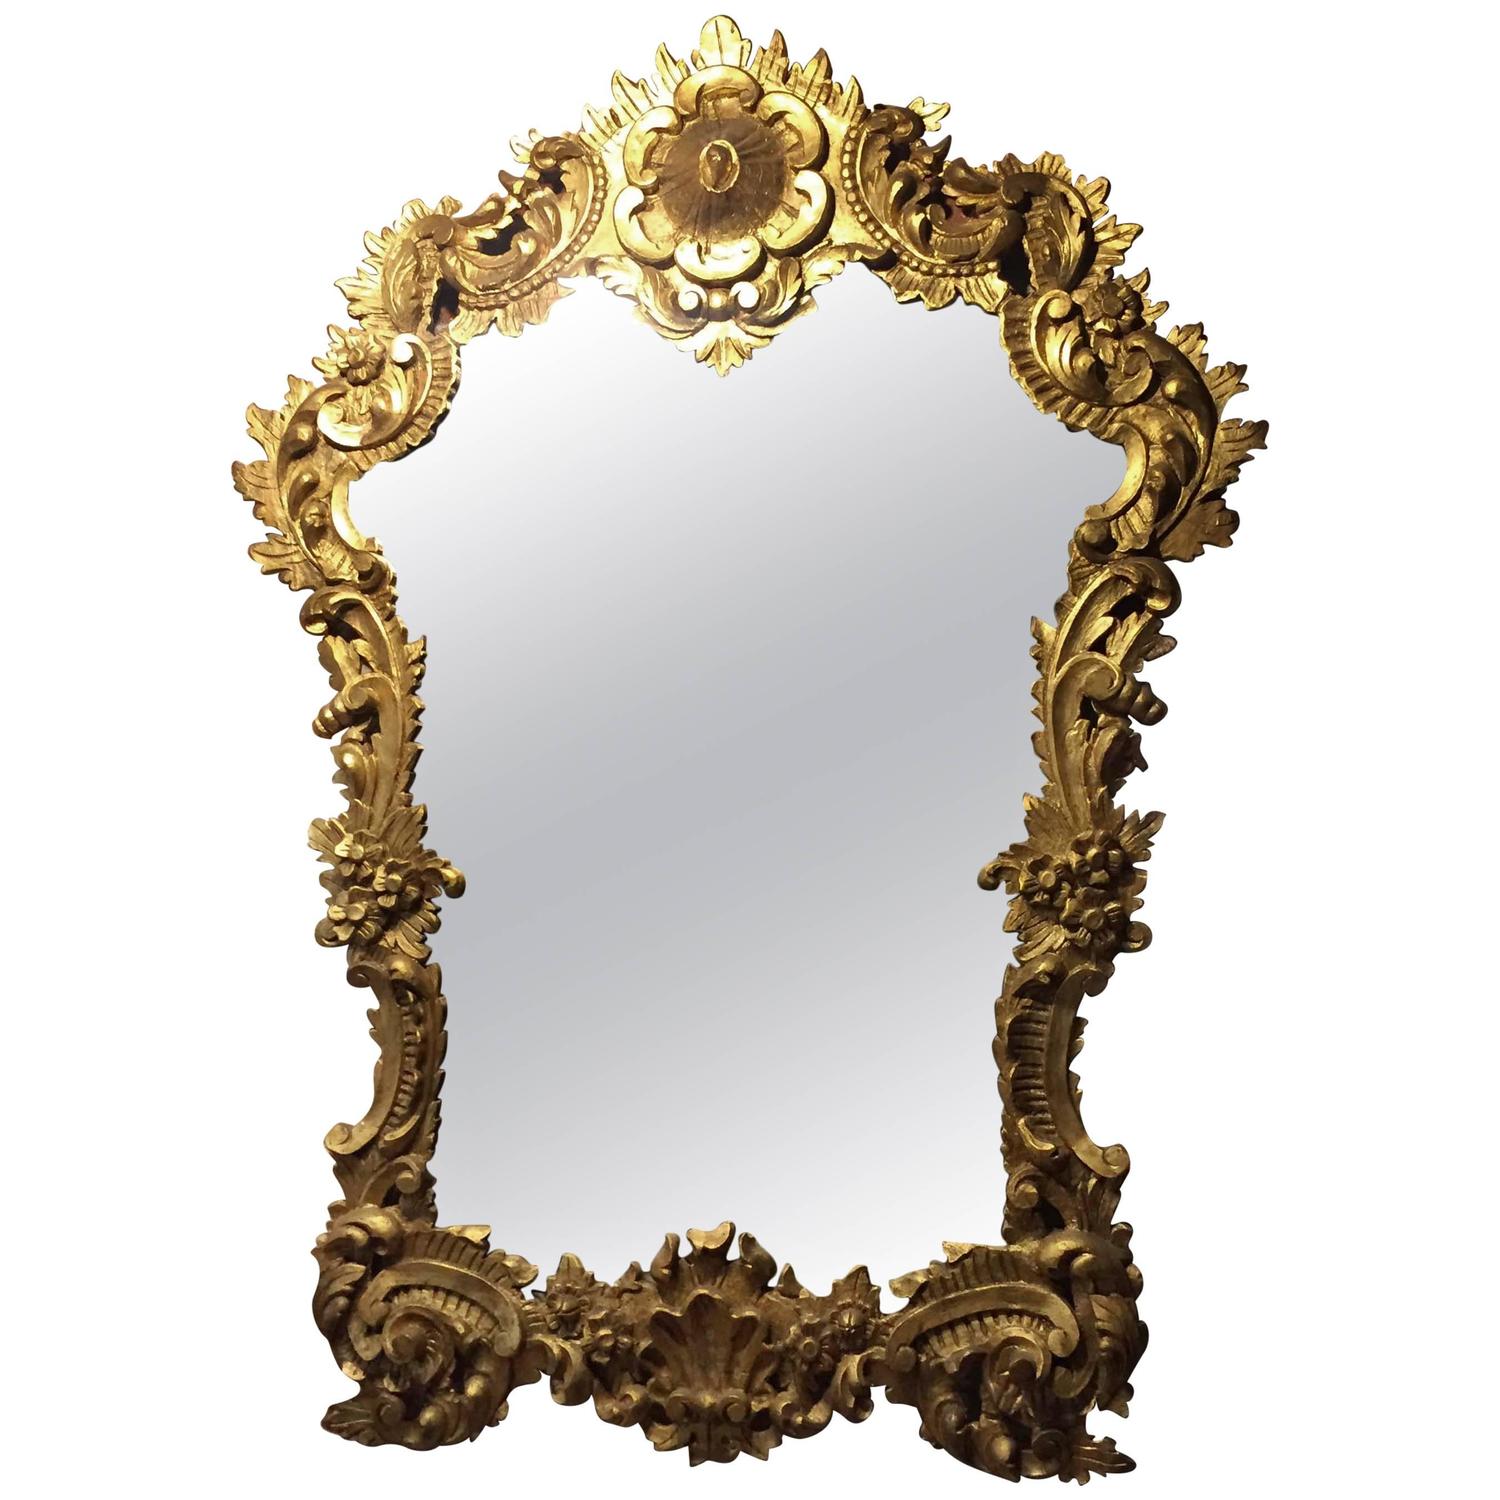 Large and Ornate Italian Rococo Style Gilt Wood Carved Hanging Mirror For Sale at 1stdibs